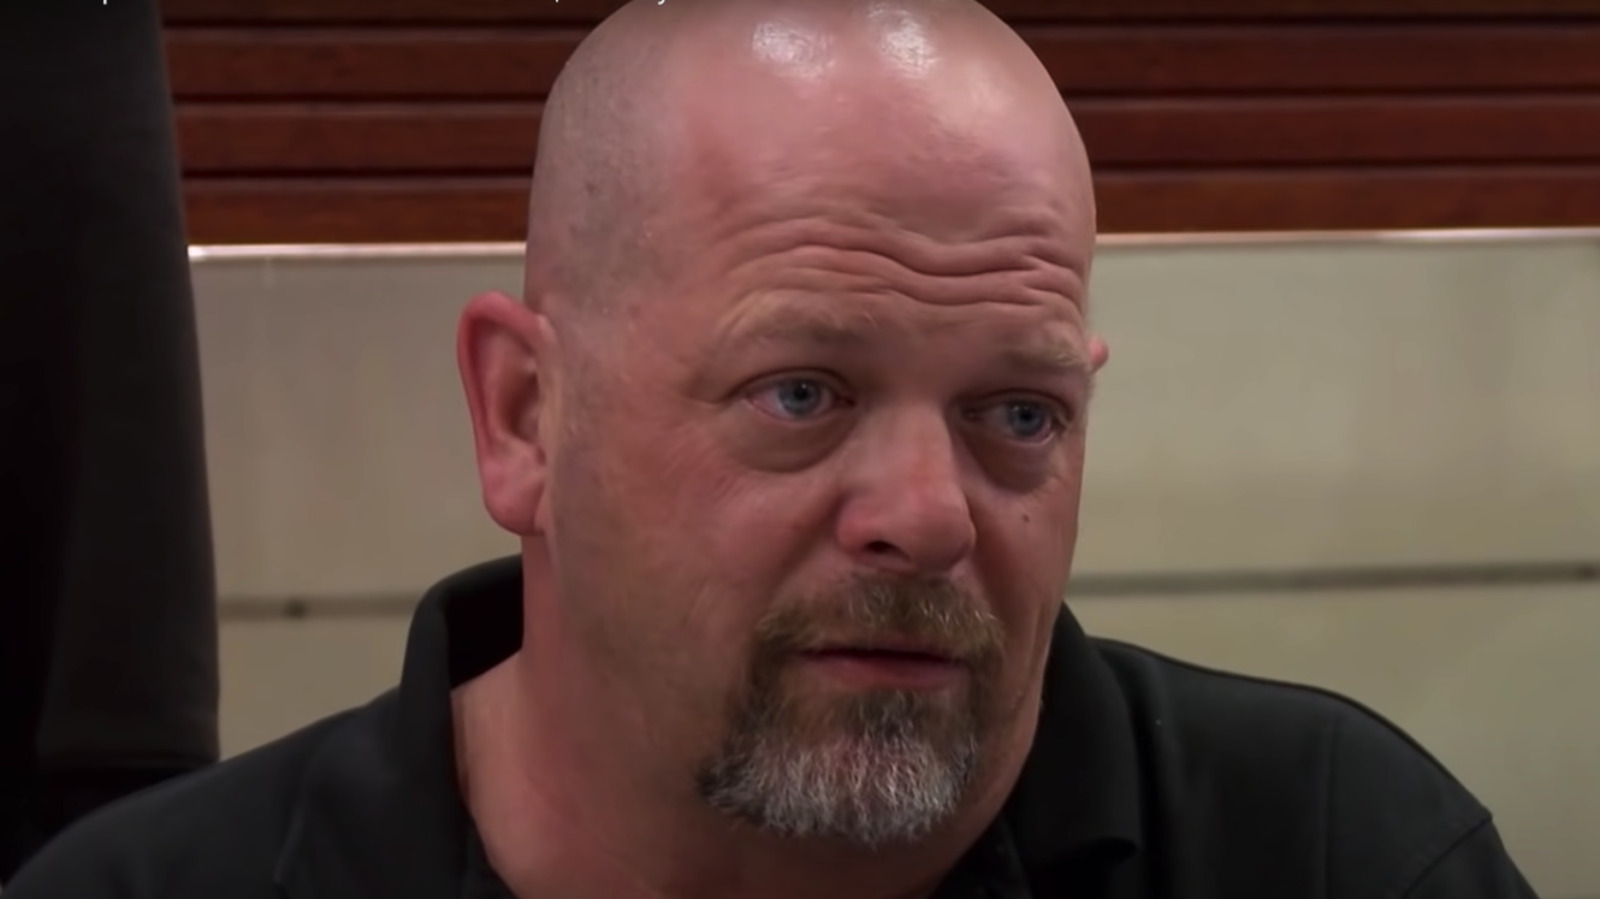 Pawn Stars' offer valuable business lessons